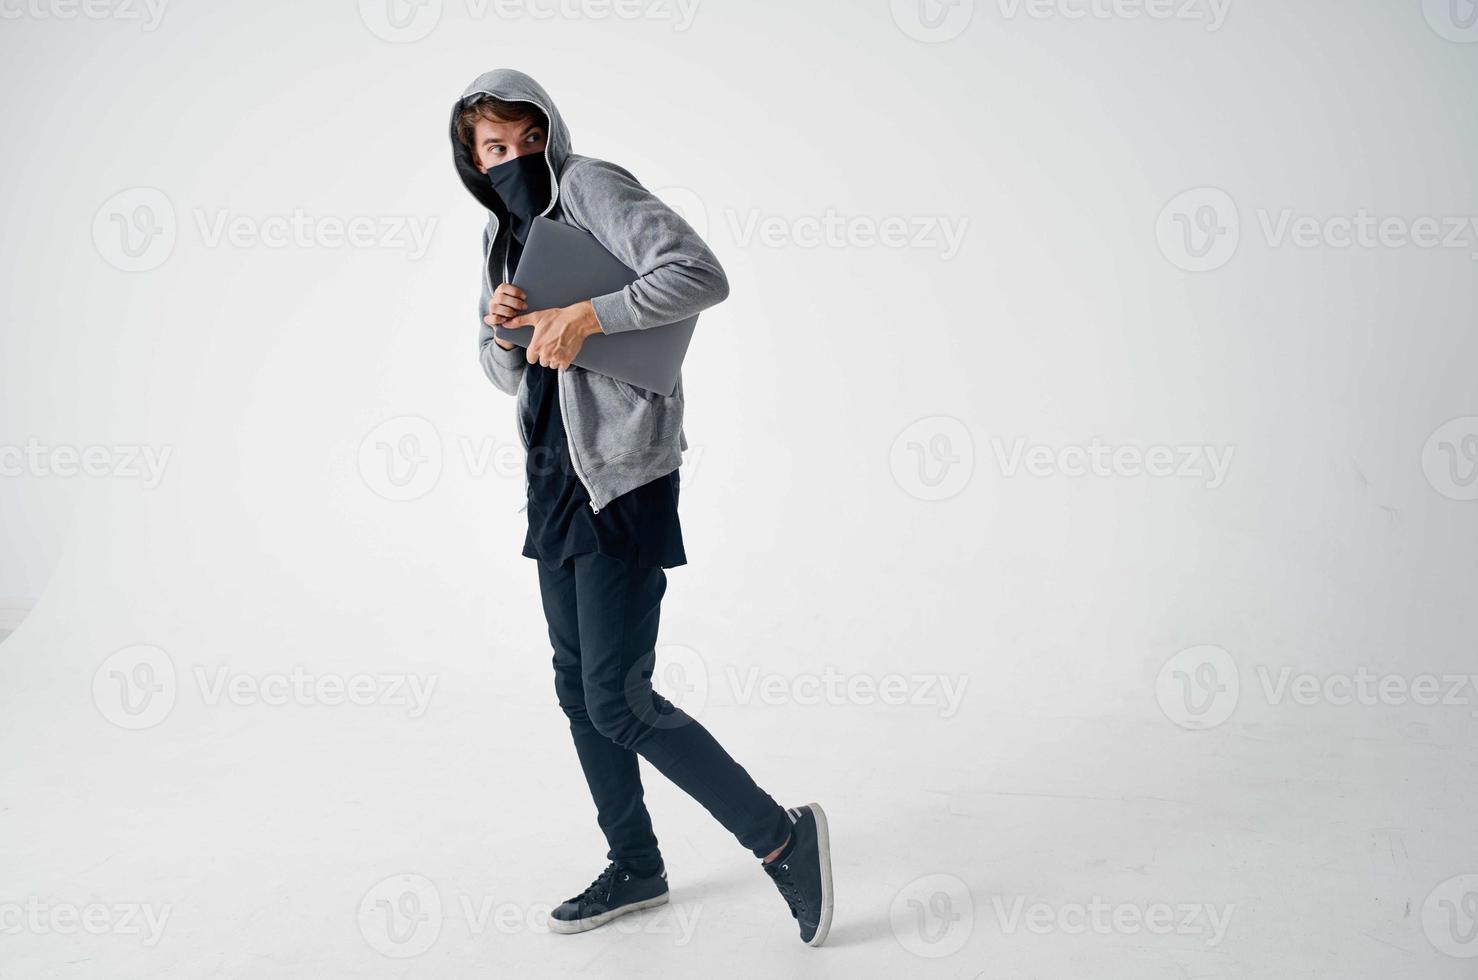 male thief stealth technique robbery safety hooligan isolated background photo